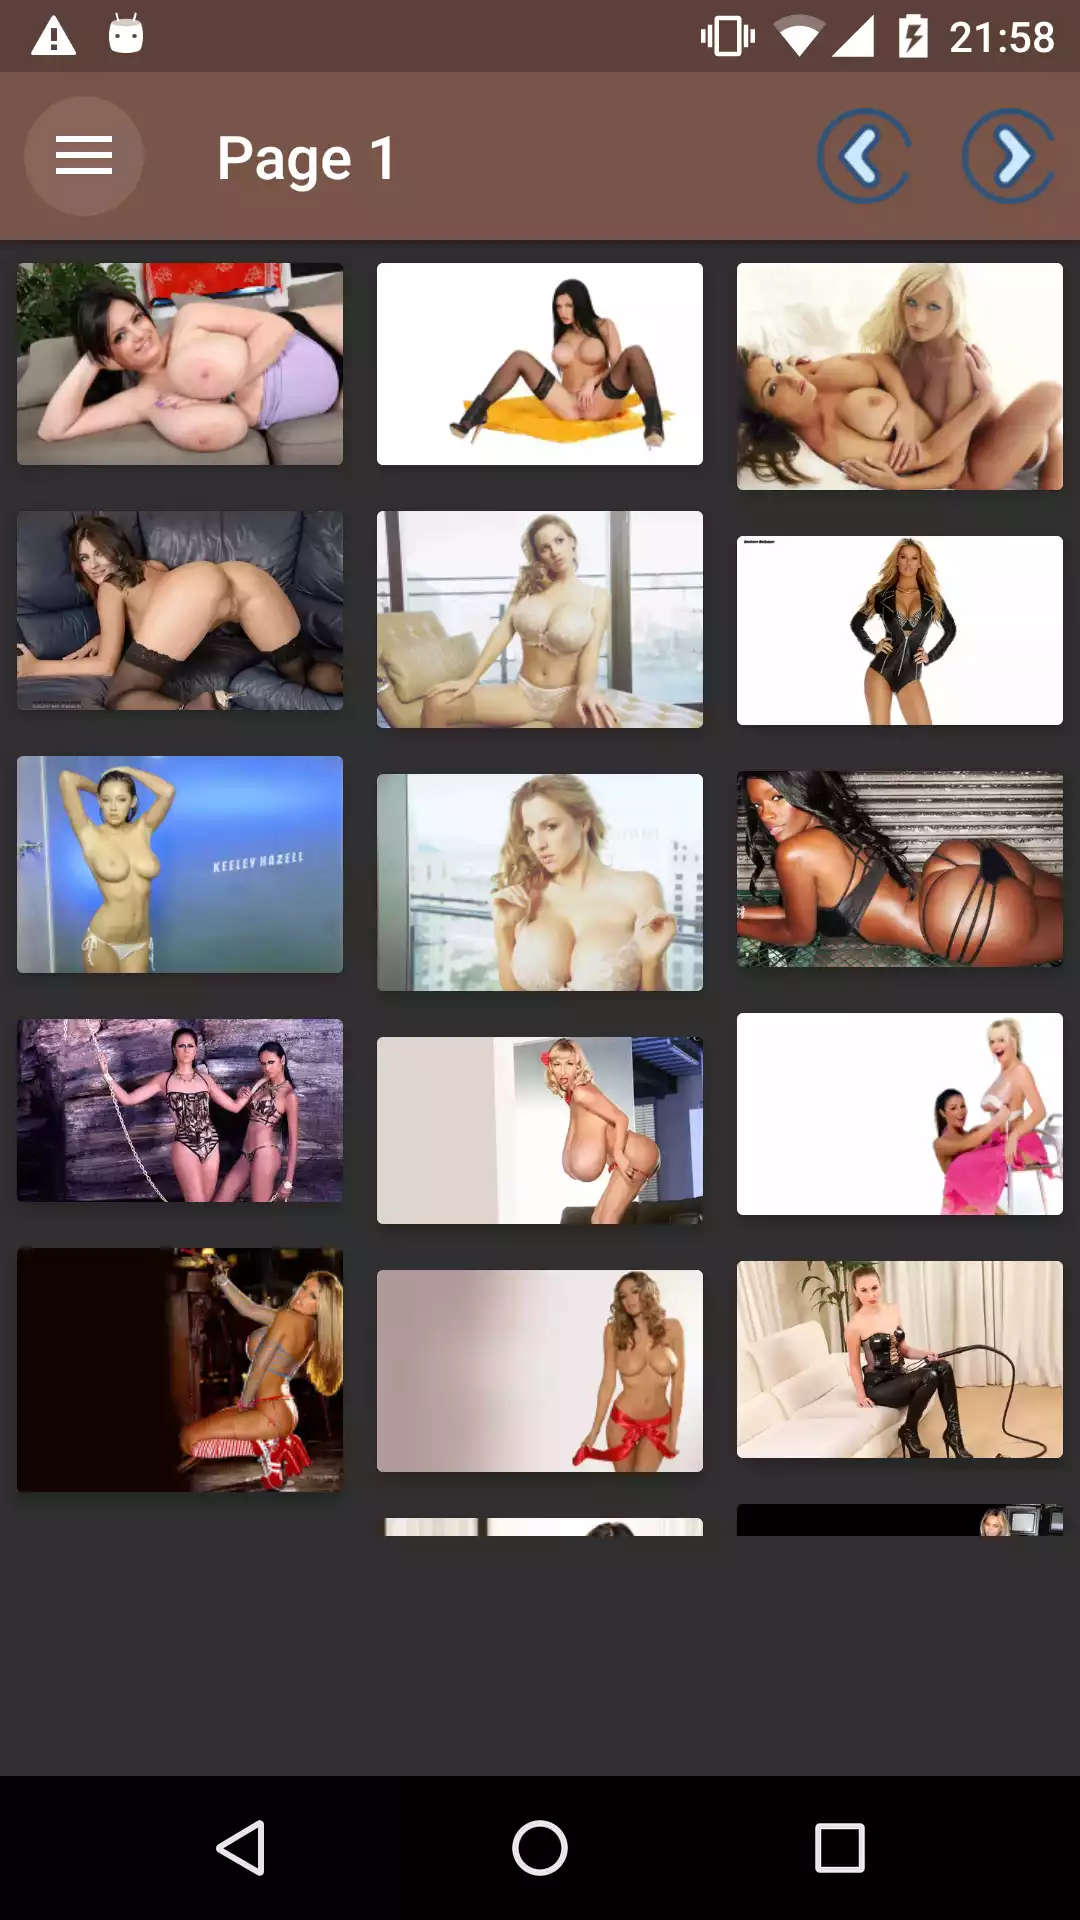 Glamour Wallpapers good,hentai,hot,download,wallpaper,free,adult,shemales,picd,porn,nude,pics,pornstar,apps,sissy,wallpapers,apk,photos,sexy,gallery,ebony